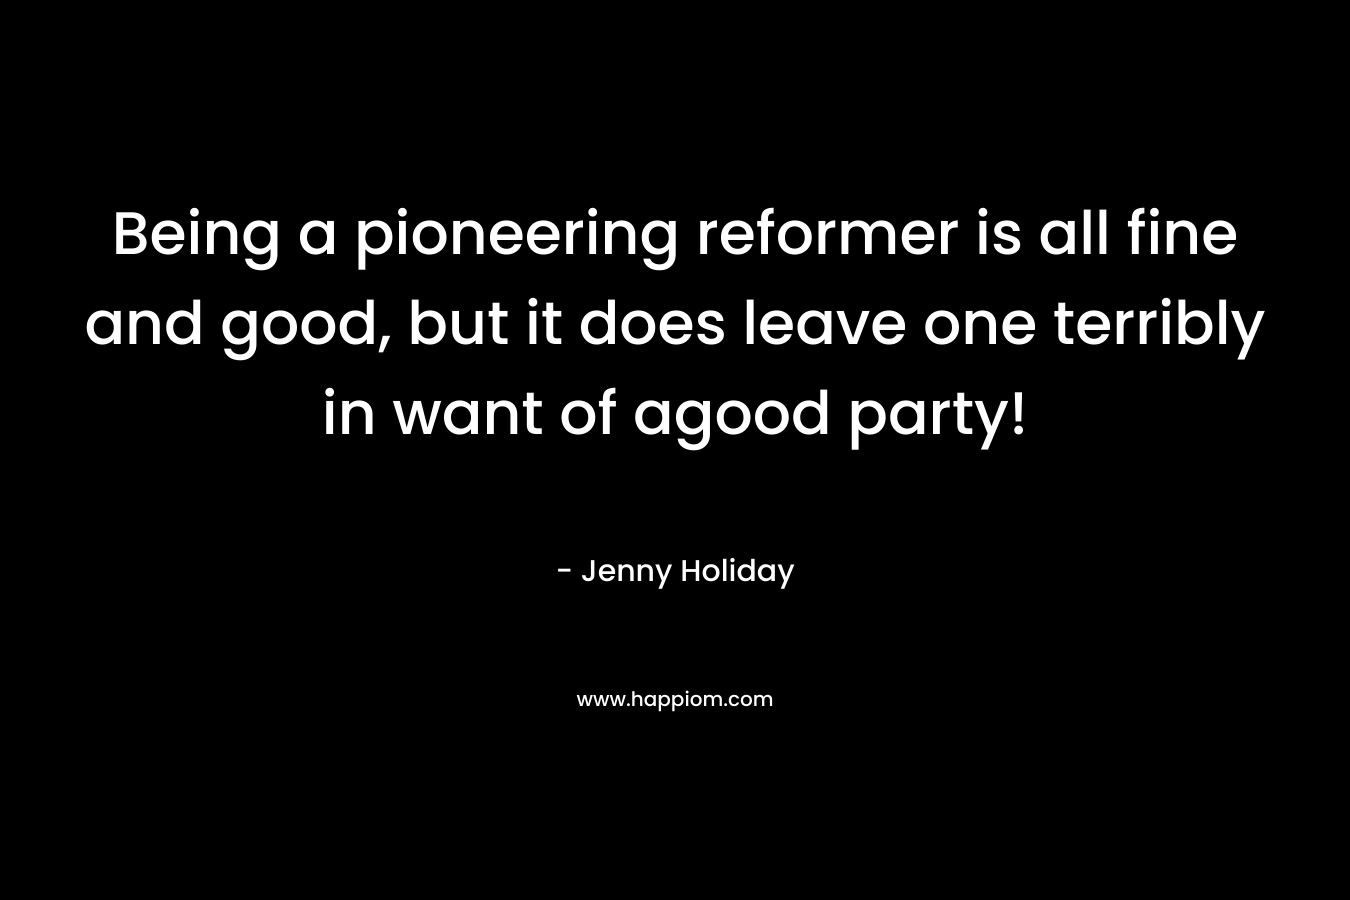 Being a pioneering reformer is all fine and good, but it does leave one terribly in want of agood party! – Jenny Holiday